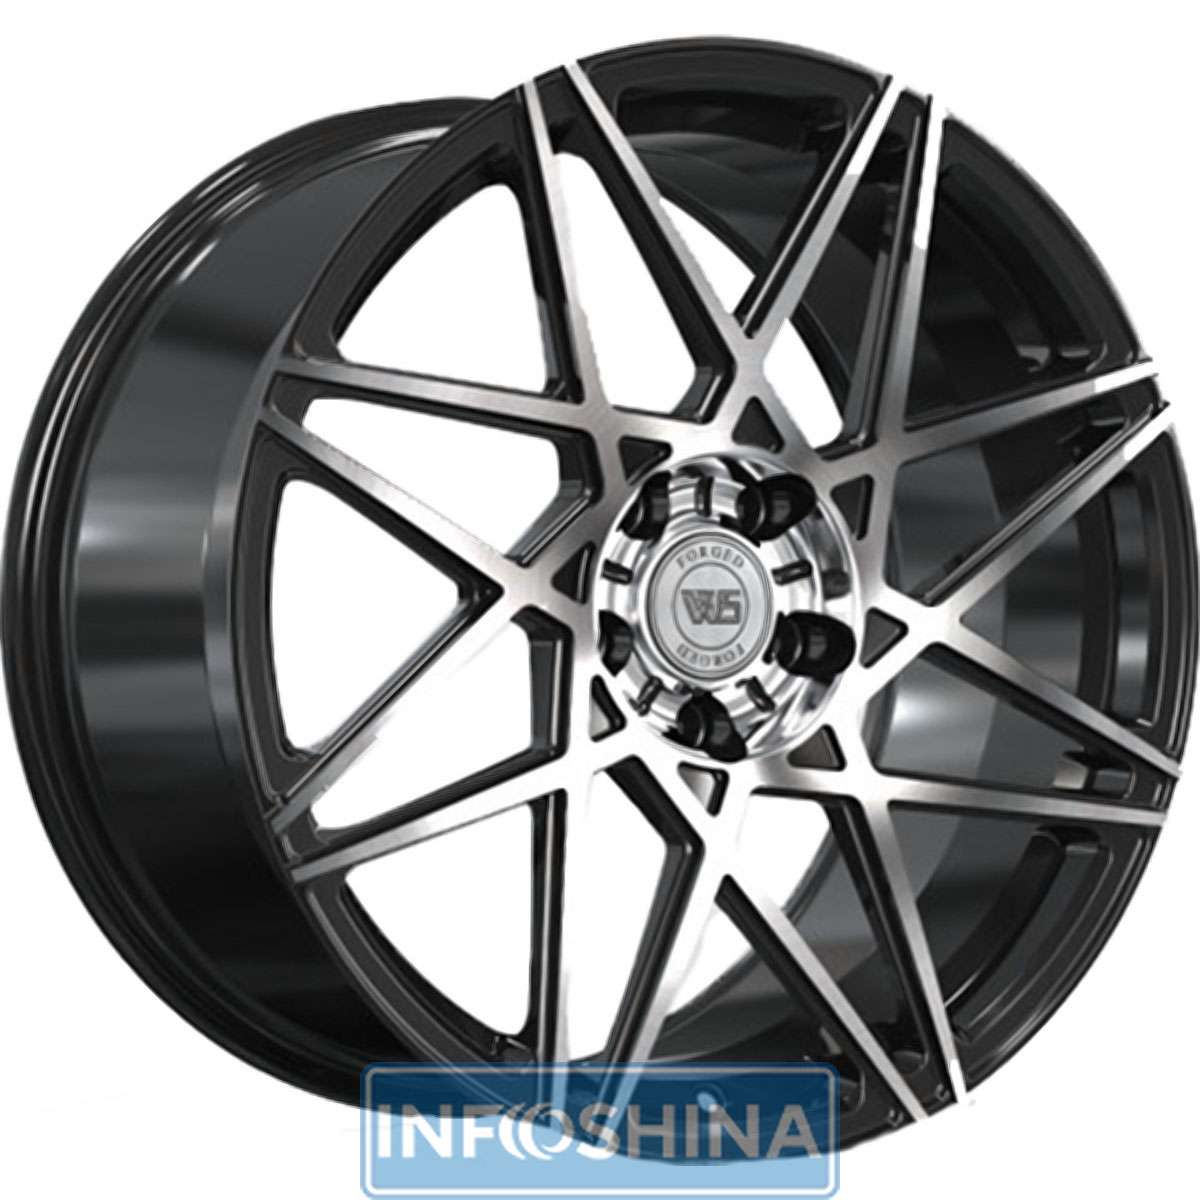 Купить диски WS Forged WS2107 Gloss Black With Machined Face R19 W9 PCD5x114.3 ET45 DIA70.5